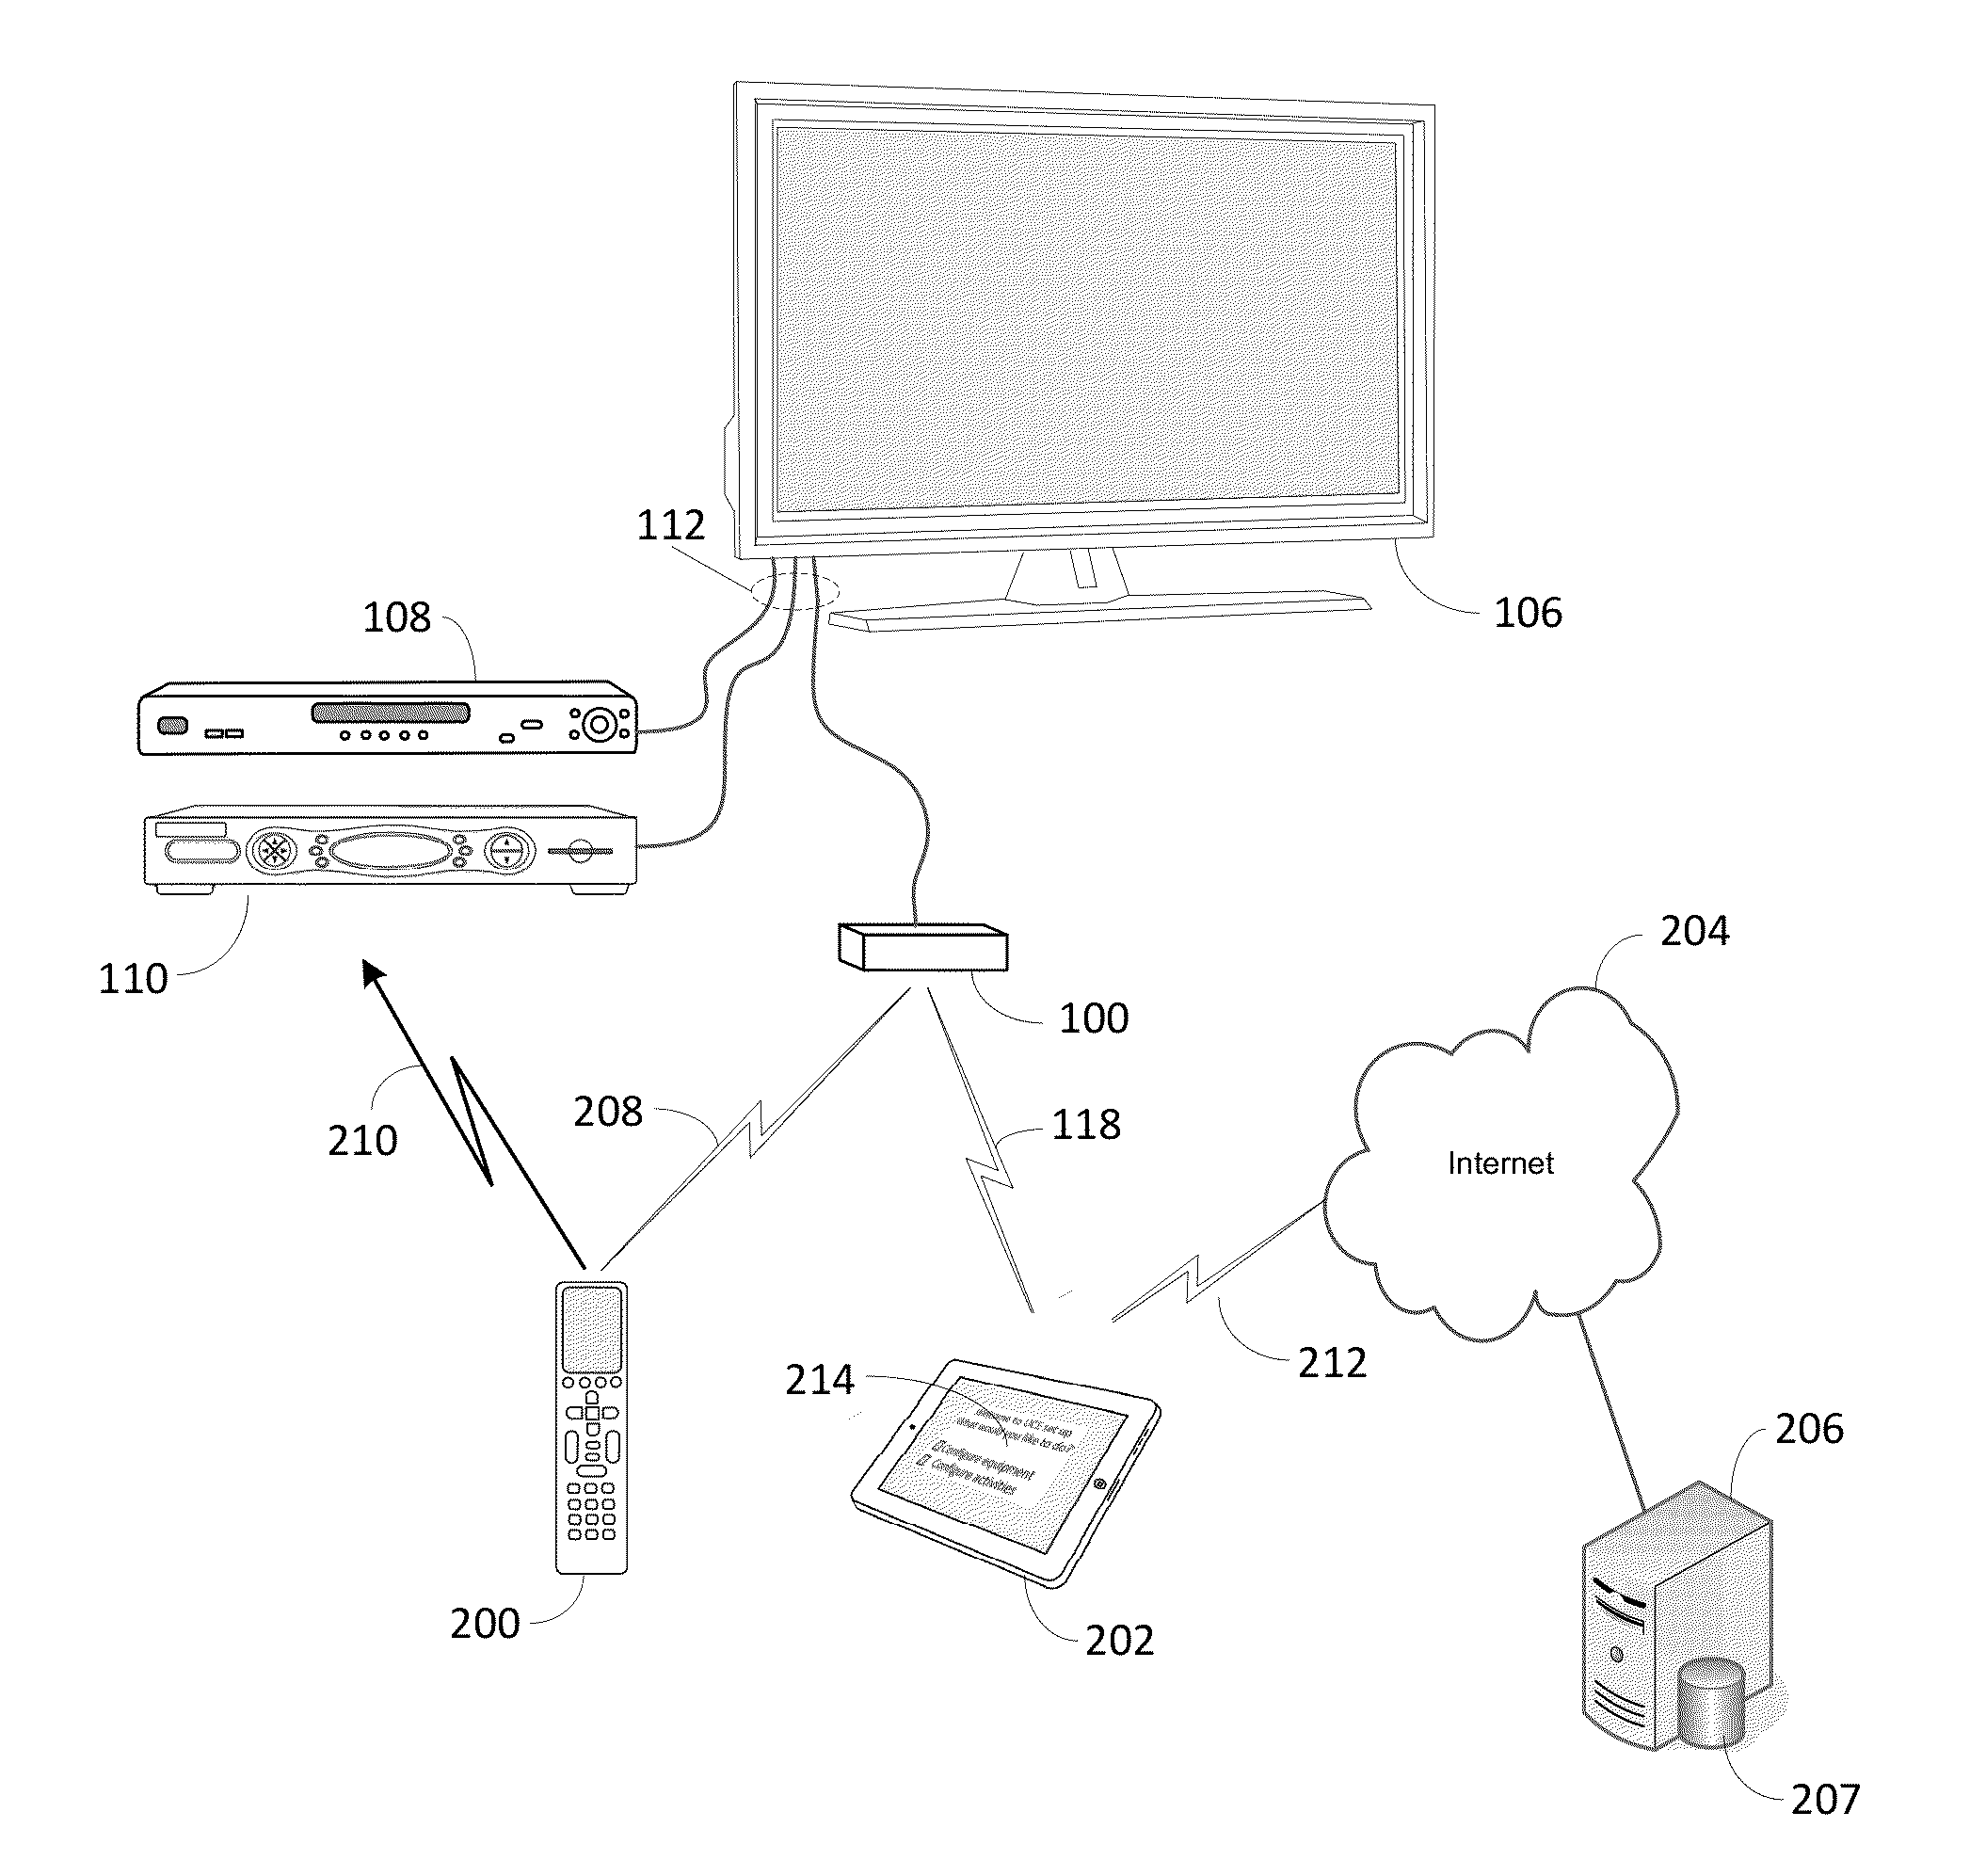 System and method for optimized appliance control